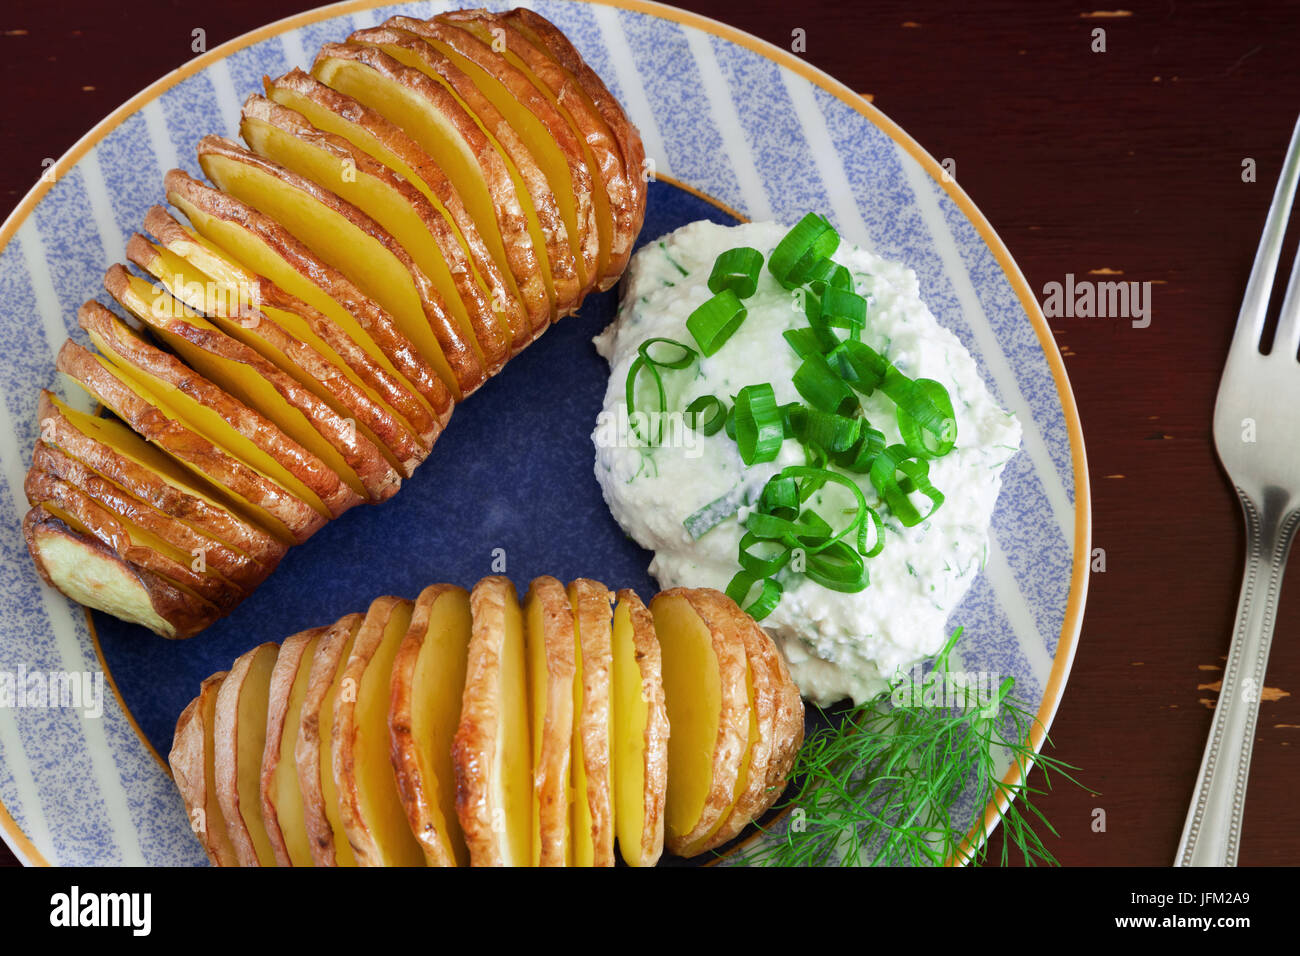 Baked potatoes on wooden table, closeup slide Stock Photo